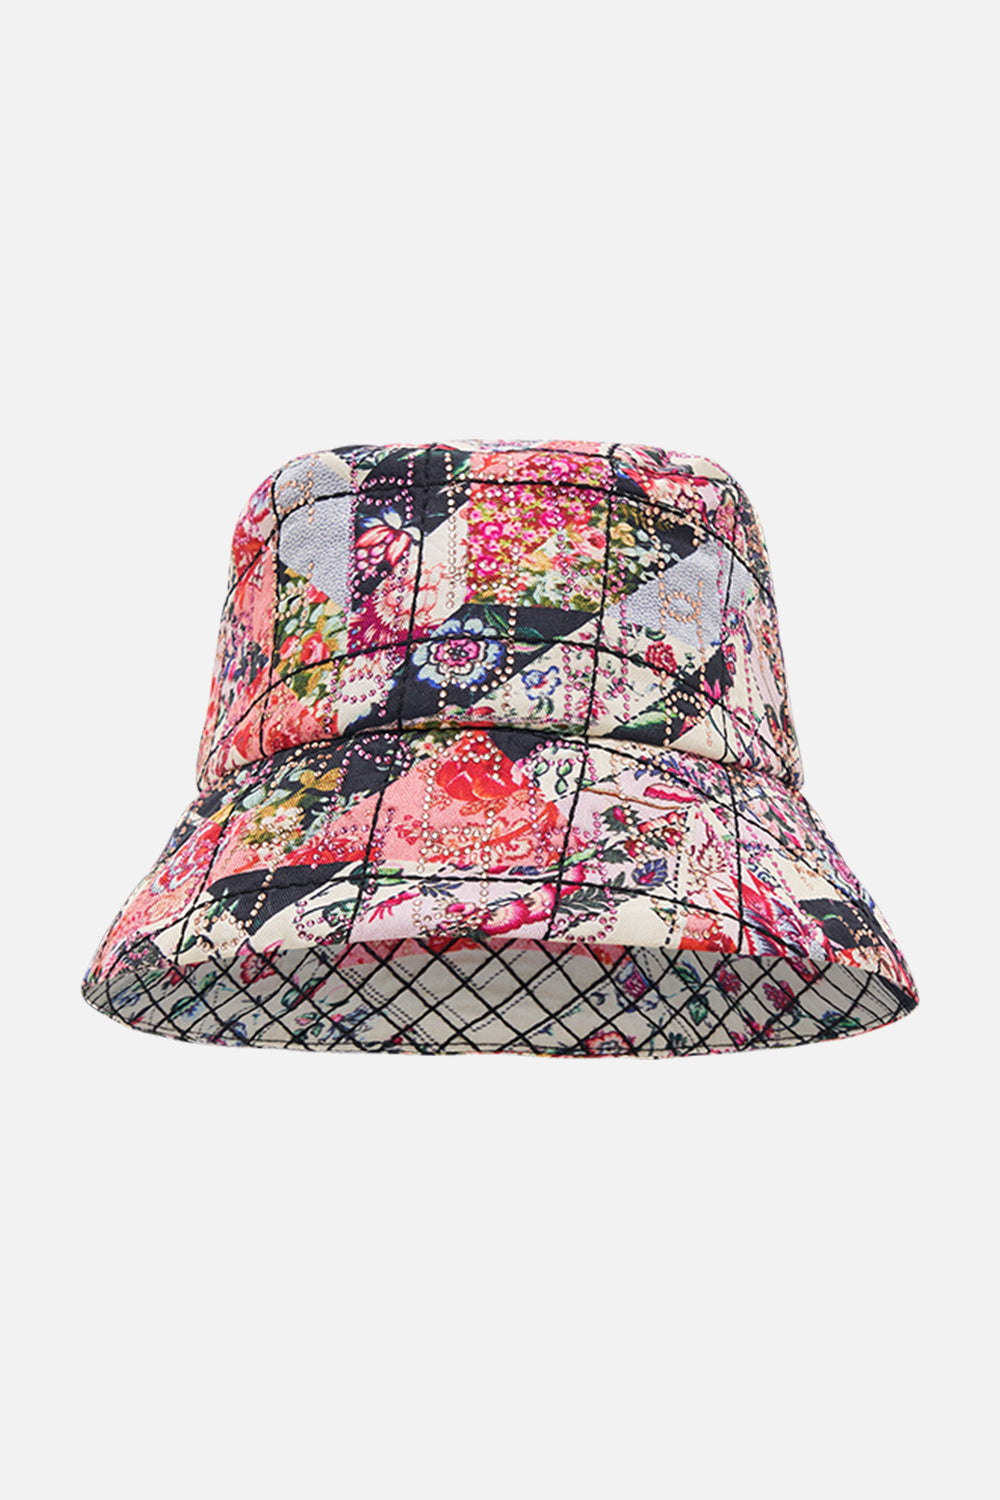 CAMILLA floral quilted bucket hat in Patchwork Poetry